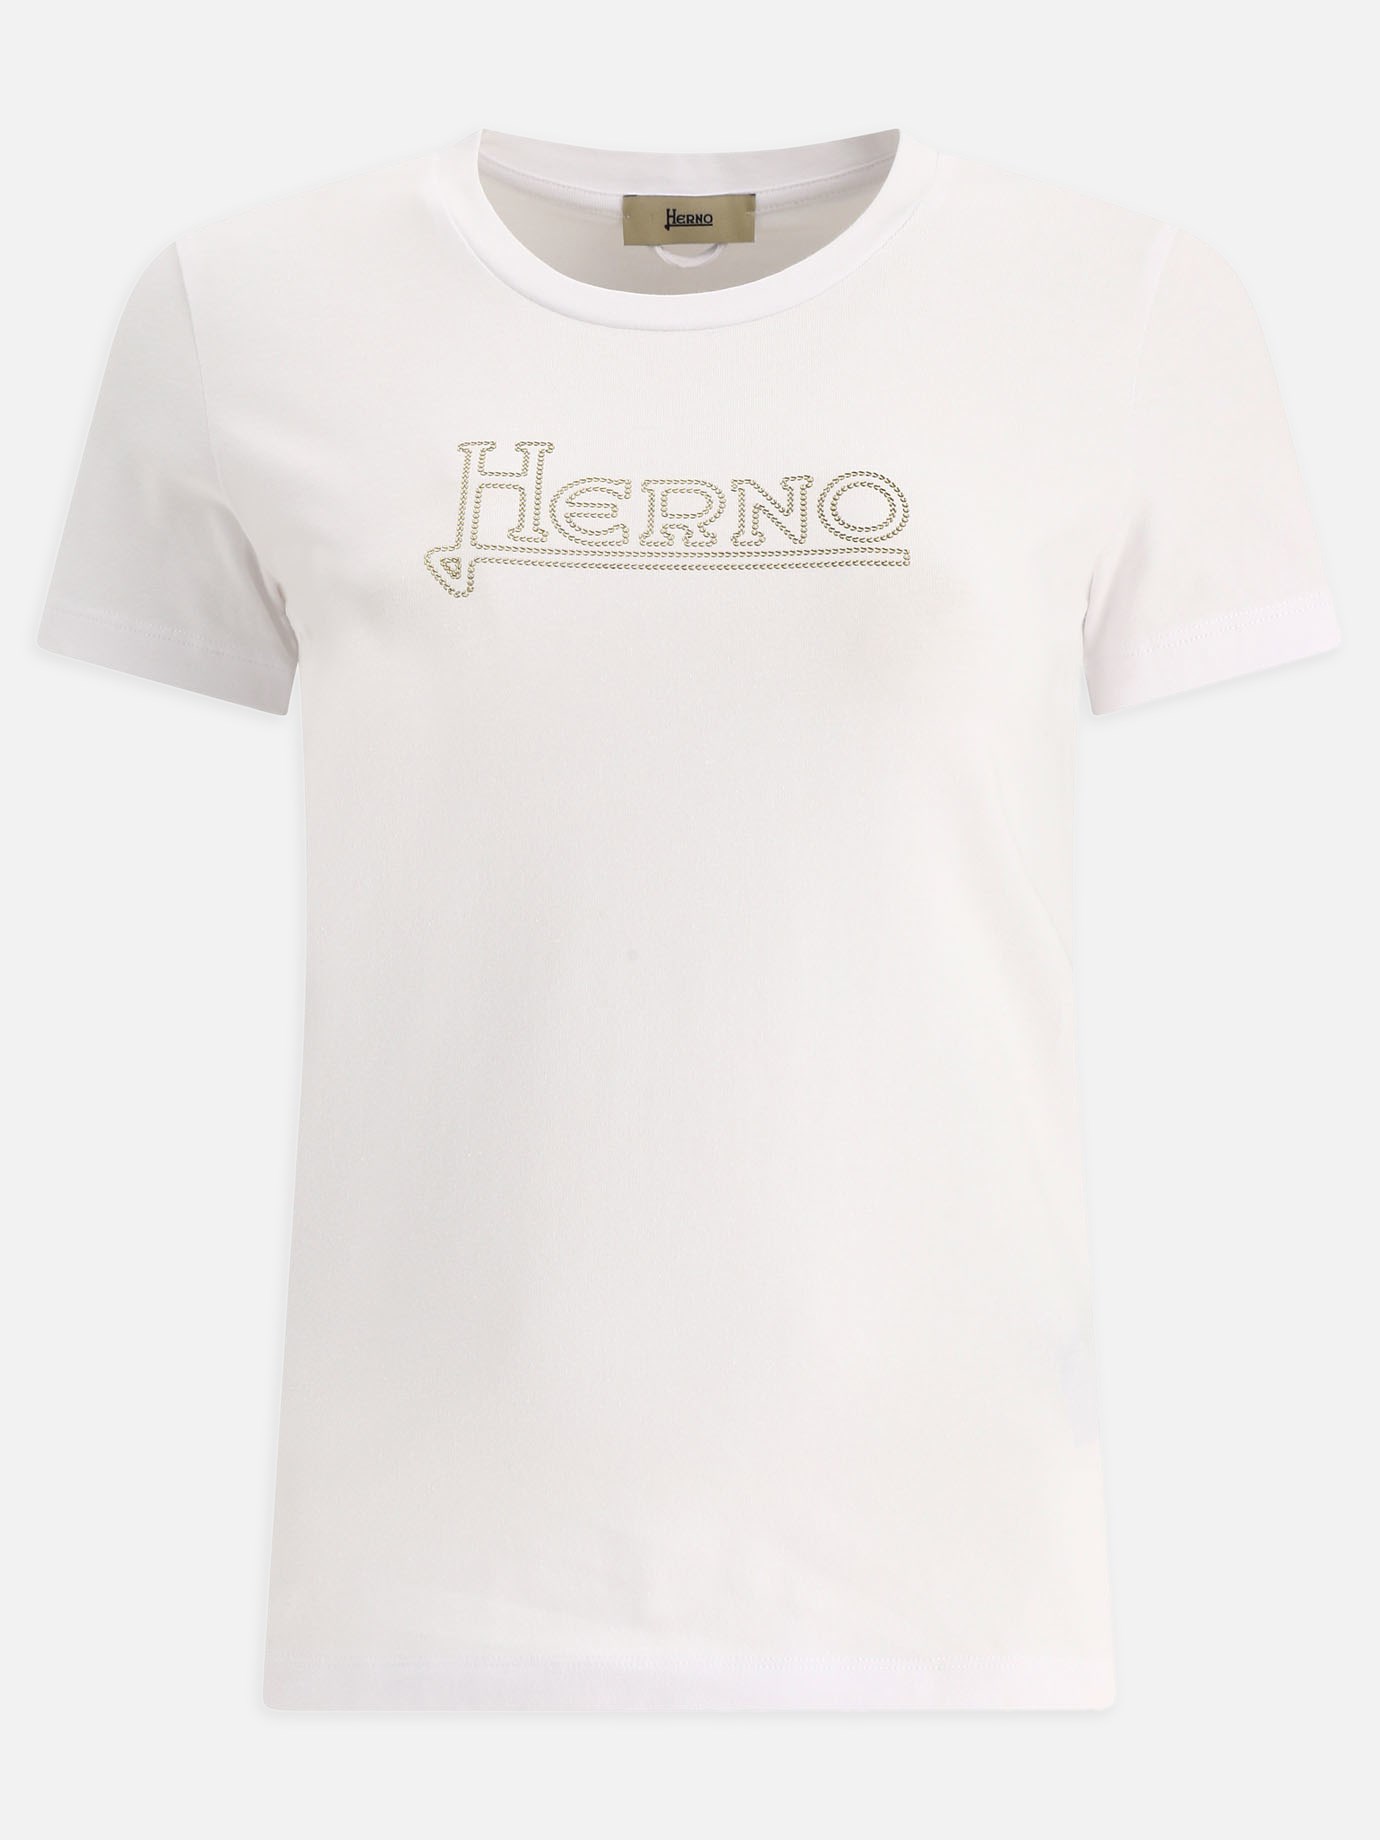  Stitches  t-shirtby Herno - 0